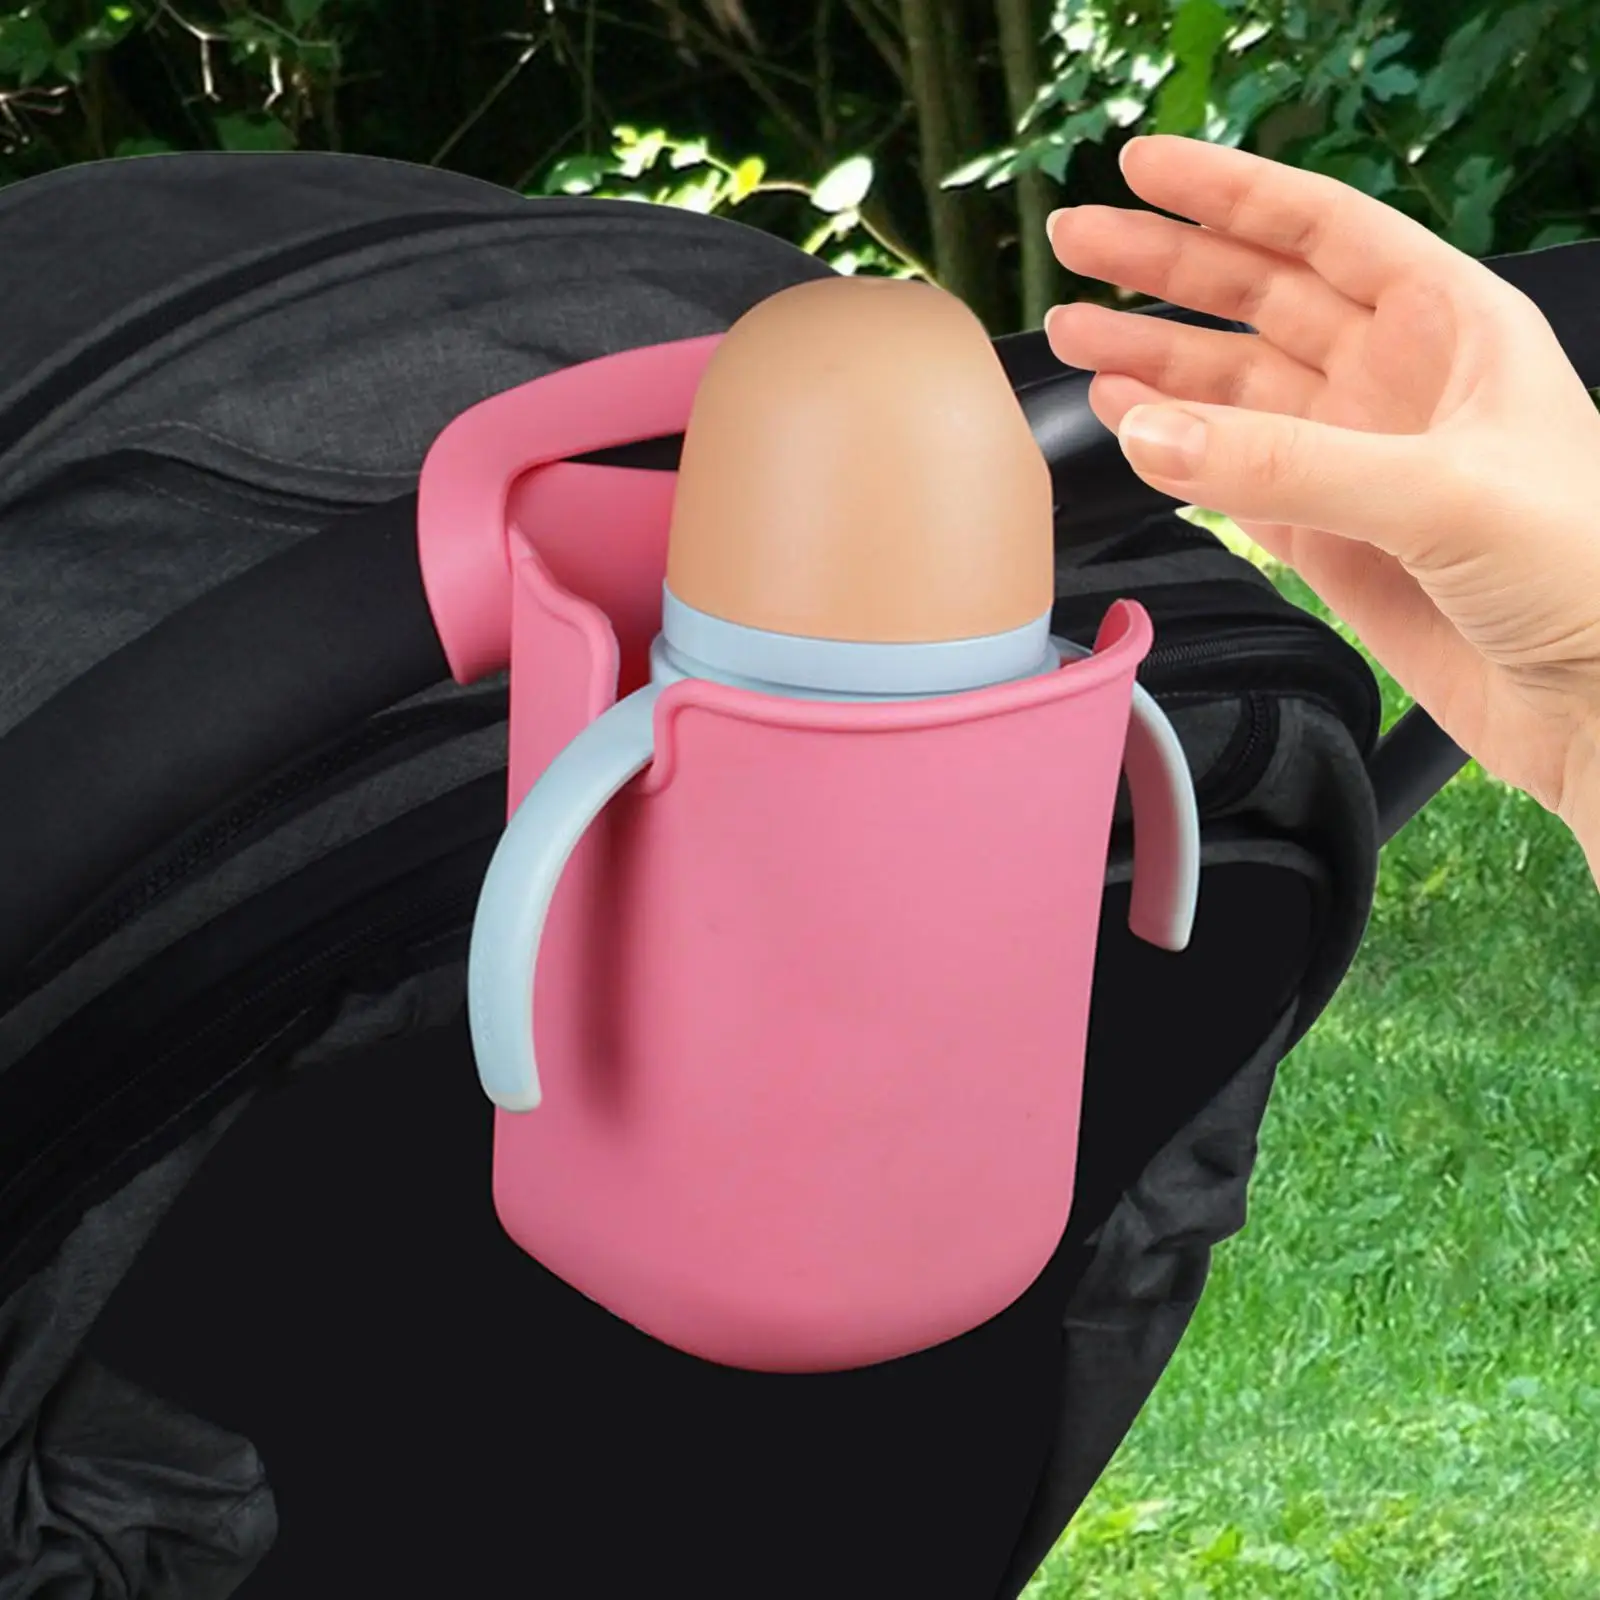 Drink Holder for Stroller Silicone Universal Adjustable Bike Cup Holder for Picnic Stroller Pushchair Chair Lawn Chairs